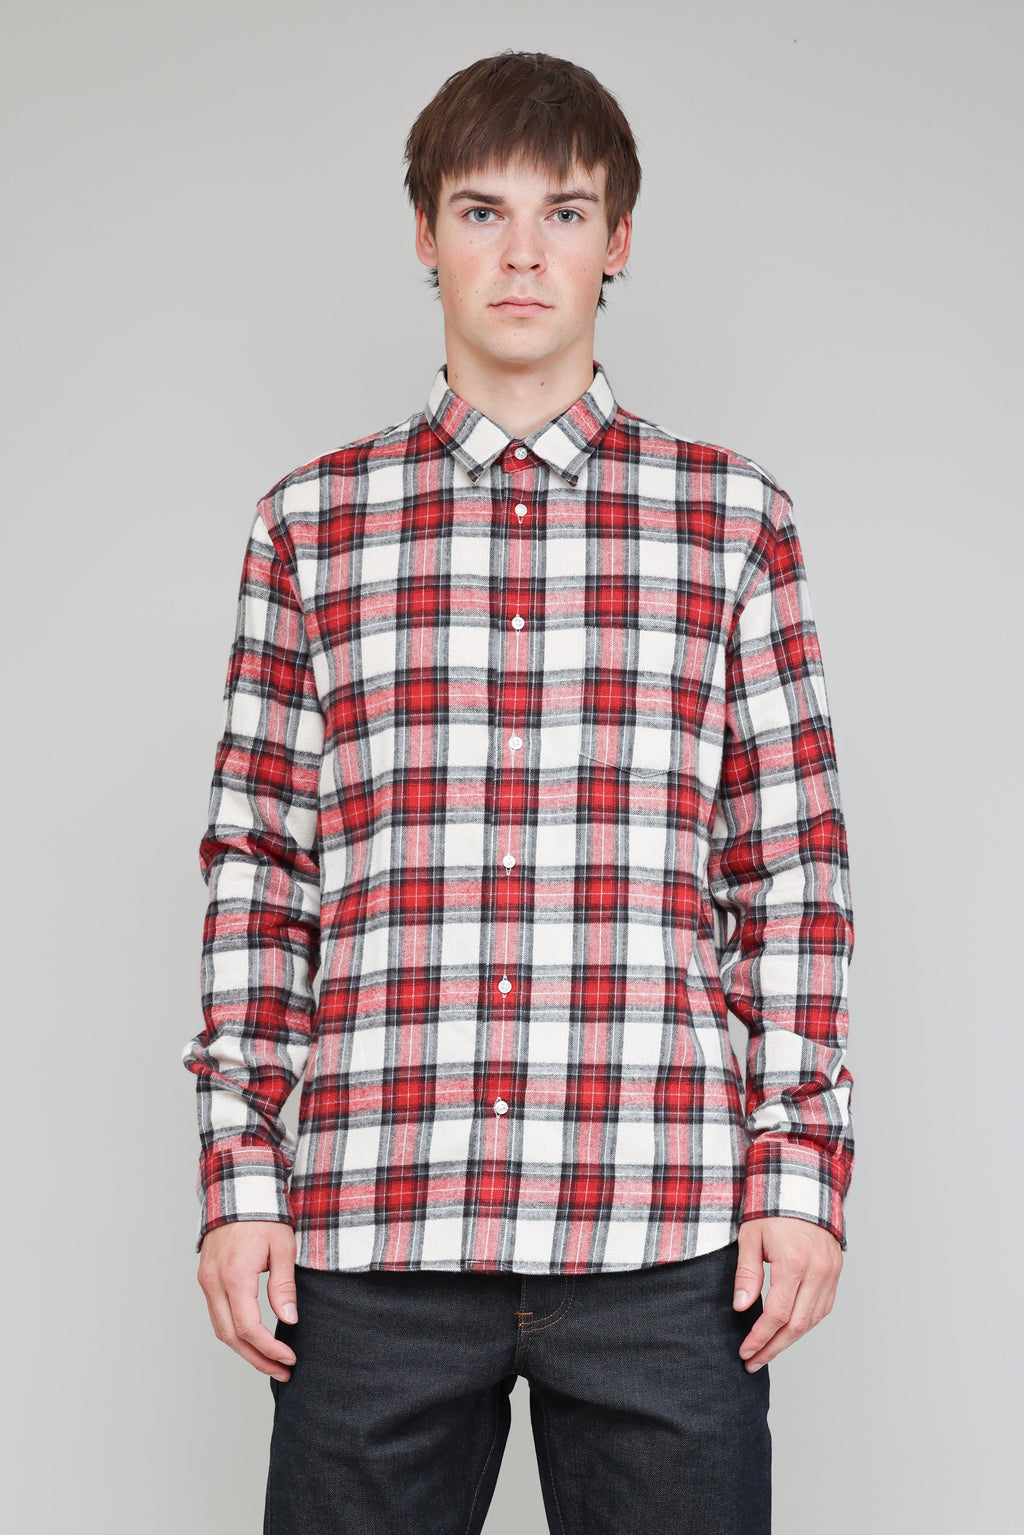 Japanese Shaggy Tartan in Red and Grey 02